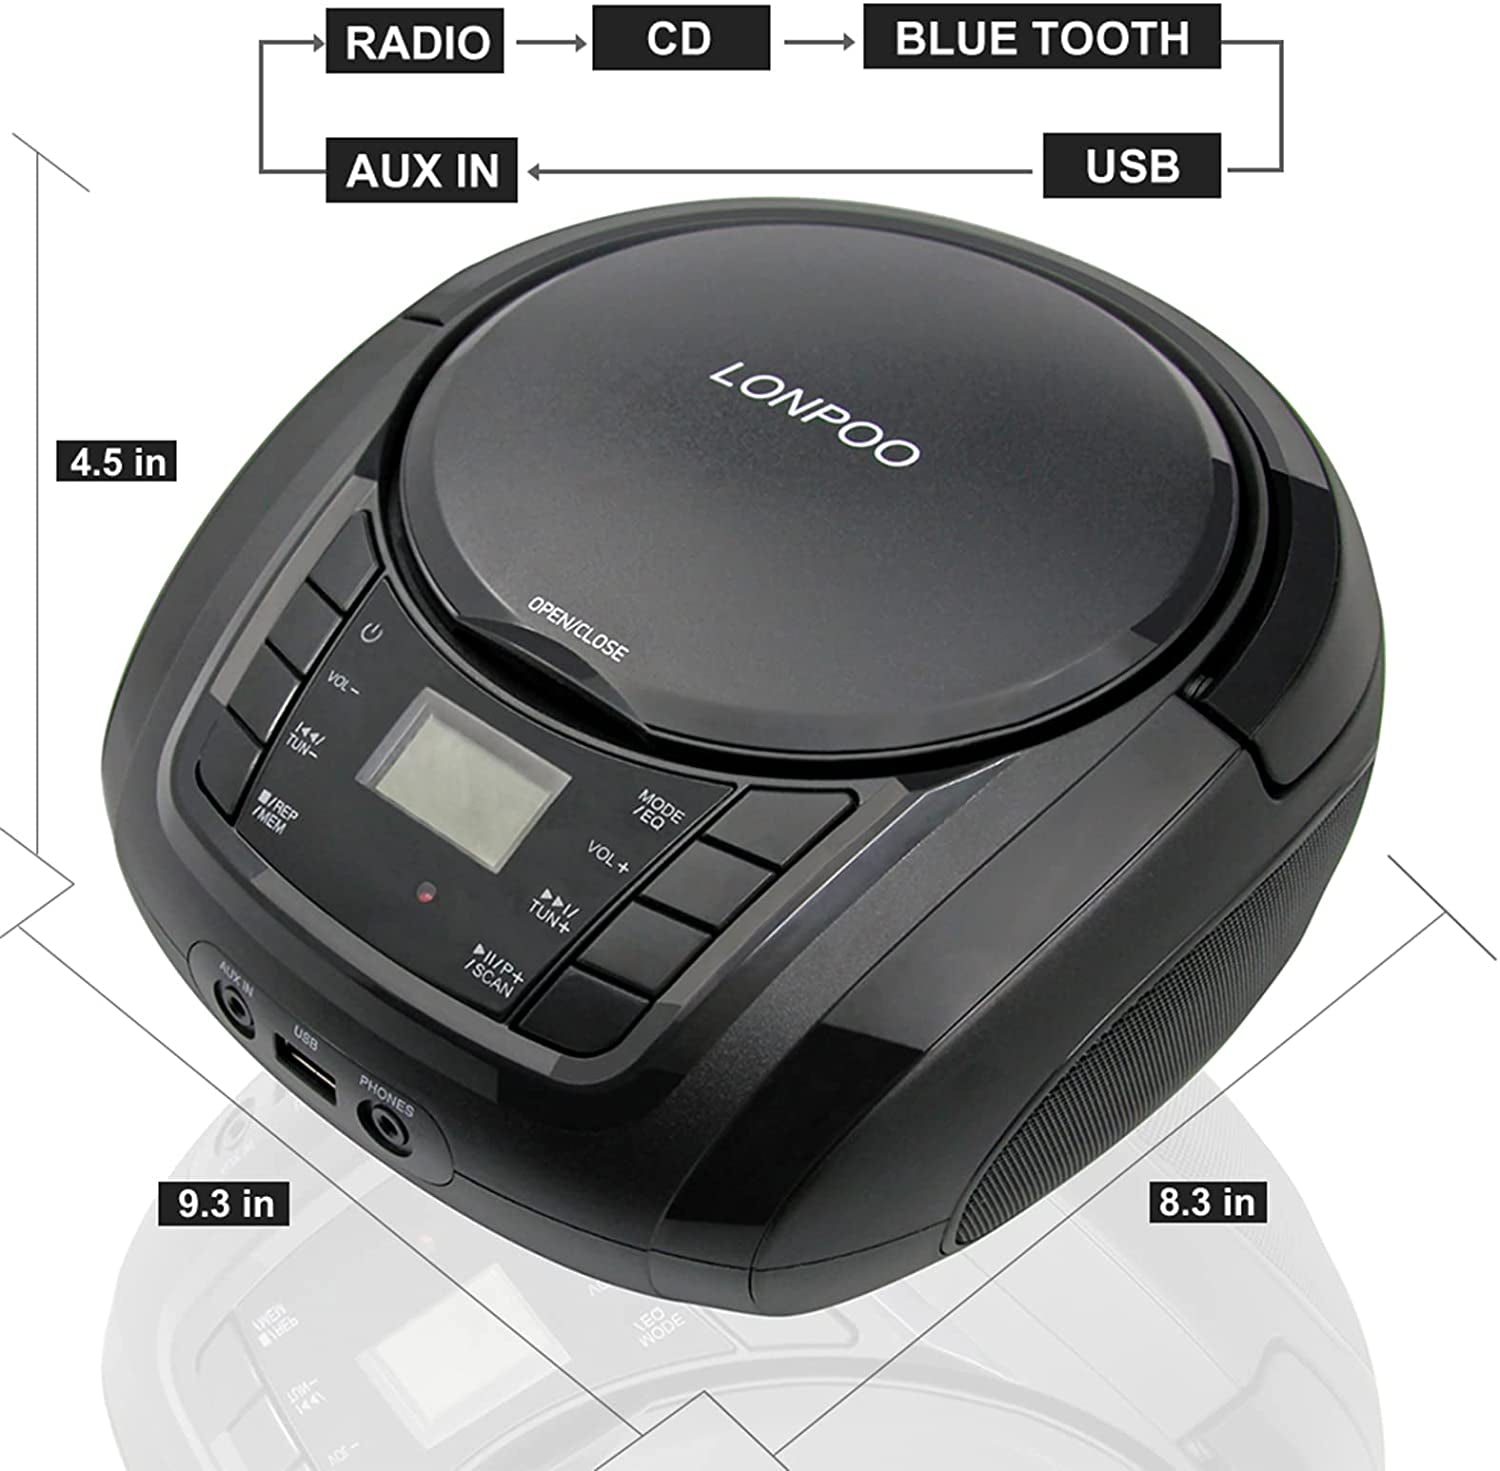 Portable Boombox Compact Disc Player with FM Radio, USB, Bluetooth, Aux Input, and Earphone Jack Output, Stereo Sound Speaker & Audio Player 